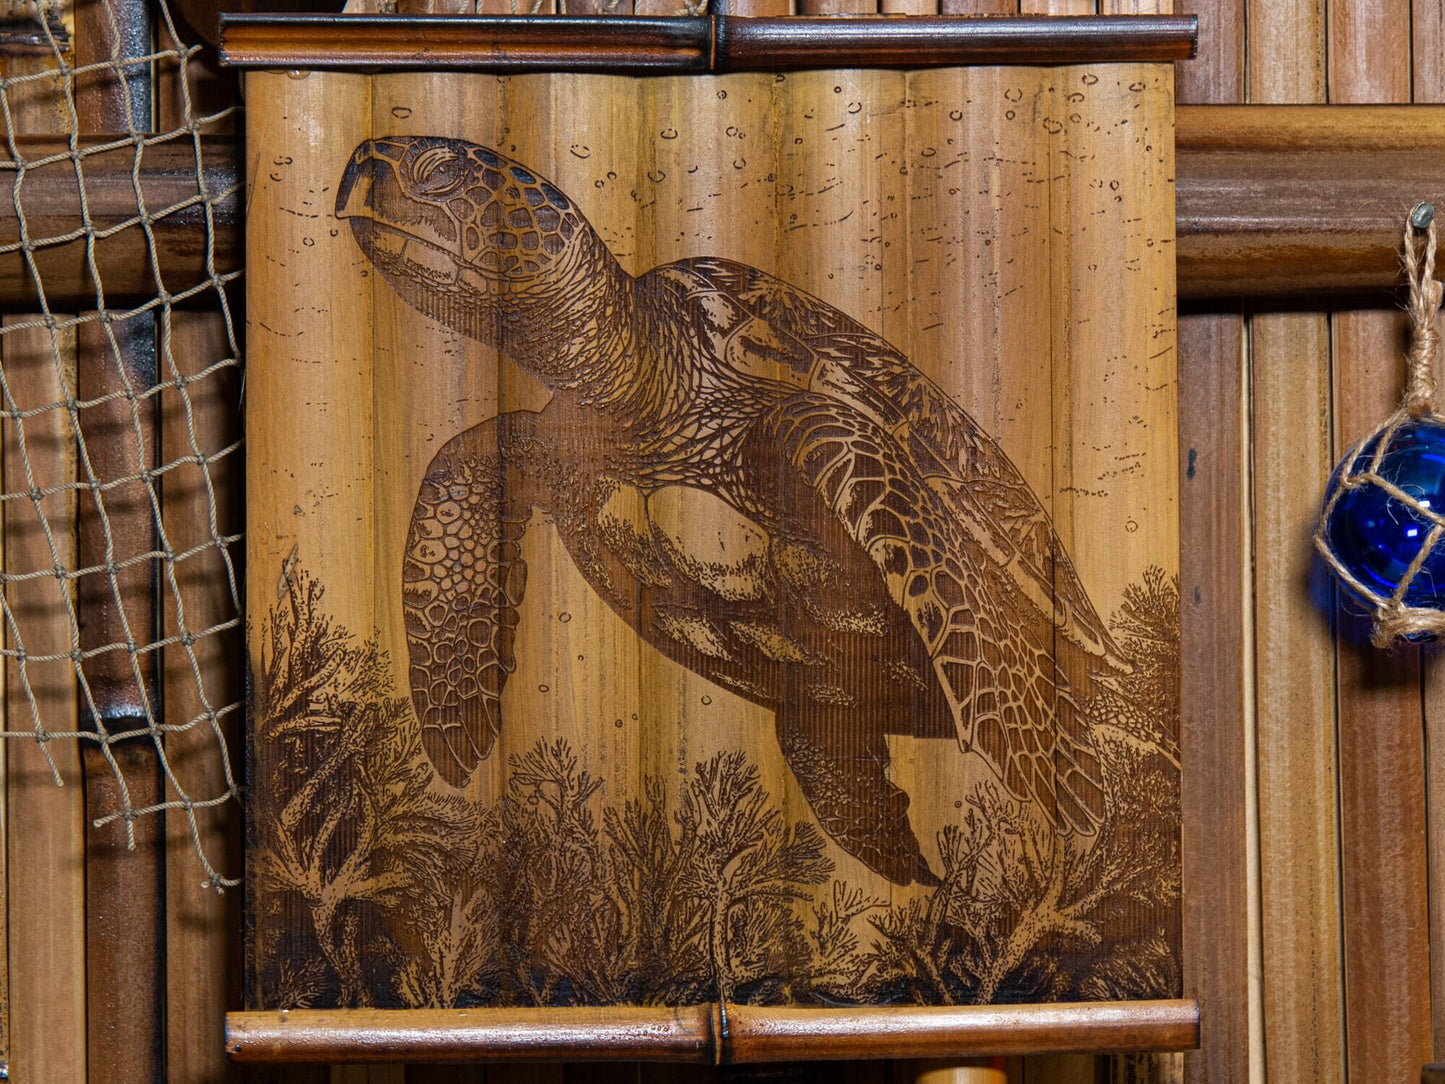 Bamboo Wall Art - Sea Turtle - Laser Wood Carving Wall Hanging - Great gift for tiki lovers!